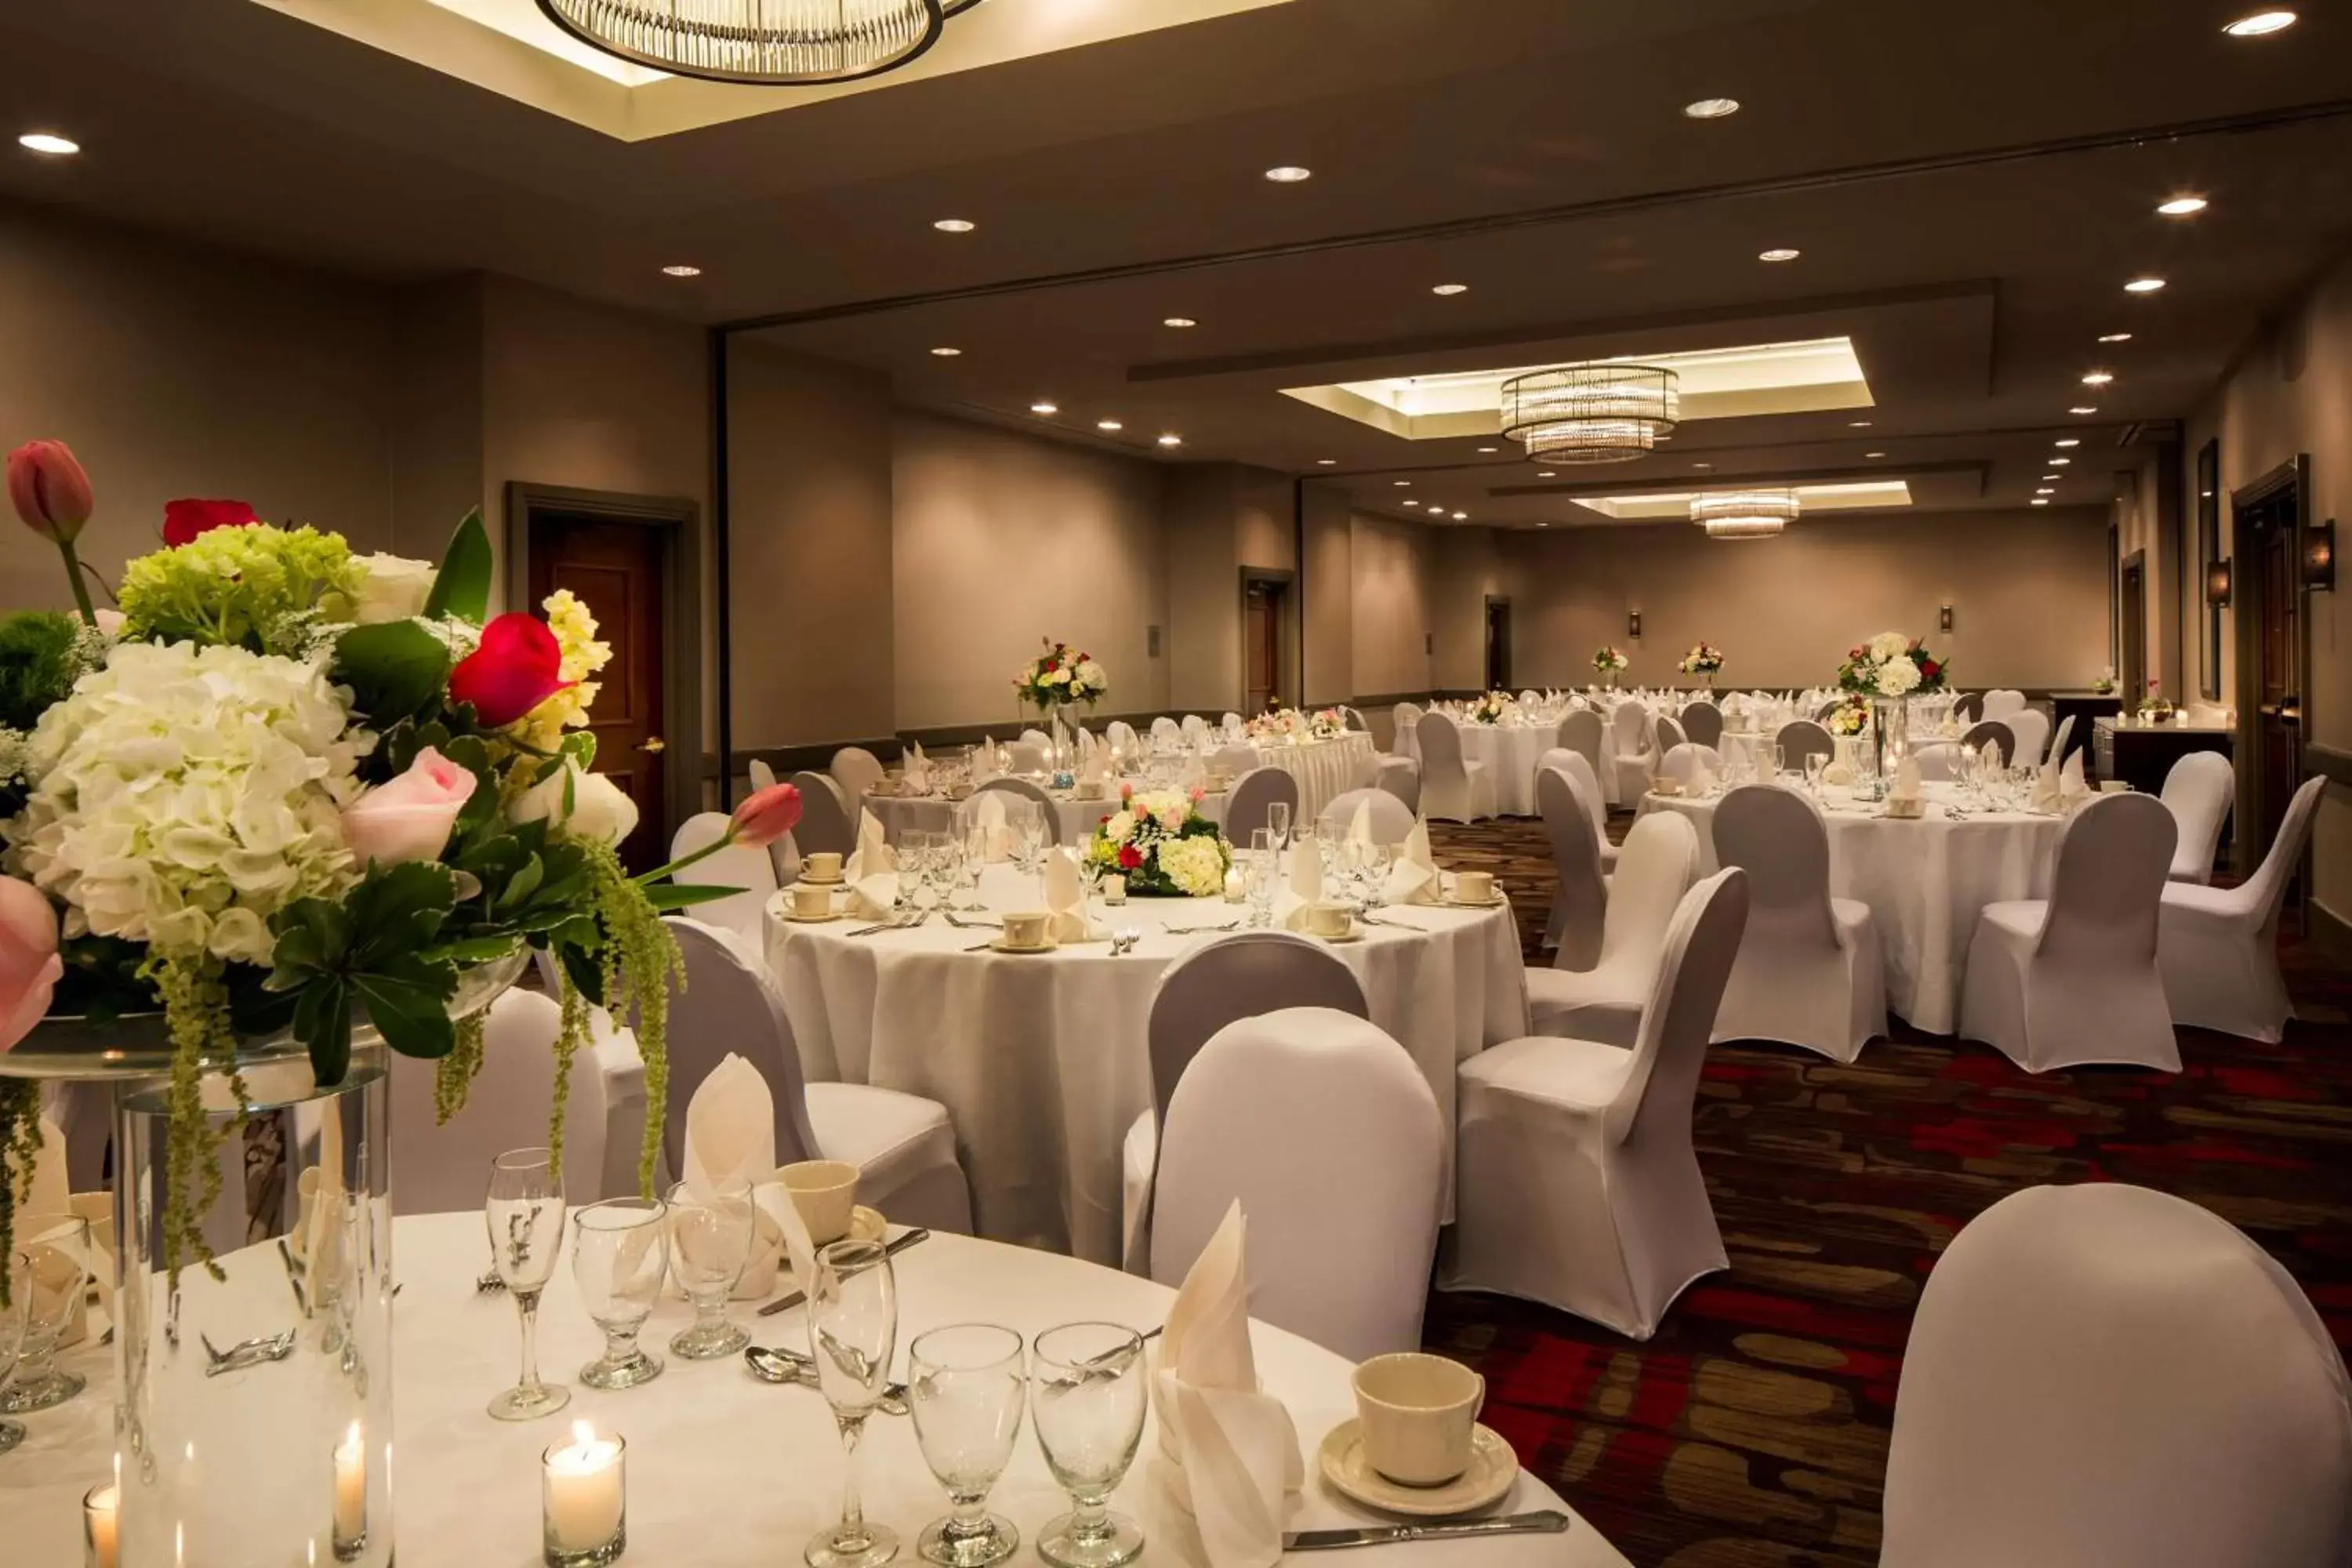 Meeting/conference room, Banquet Facilities in DoubleTree by Hilton Hotel Largo Washington DC